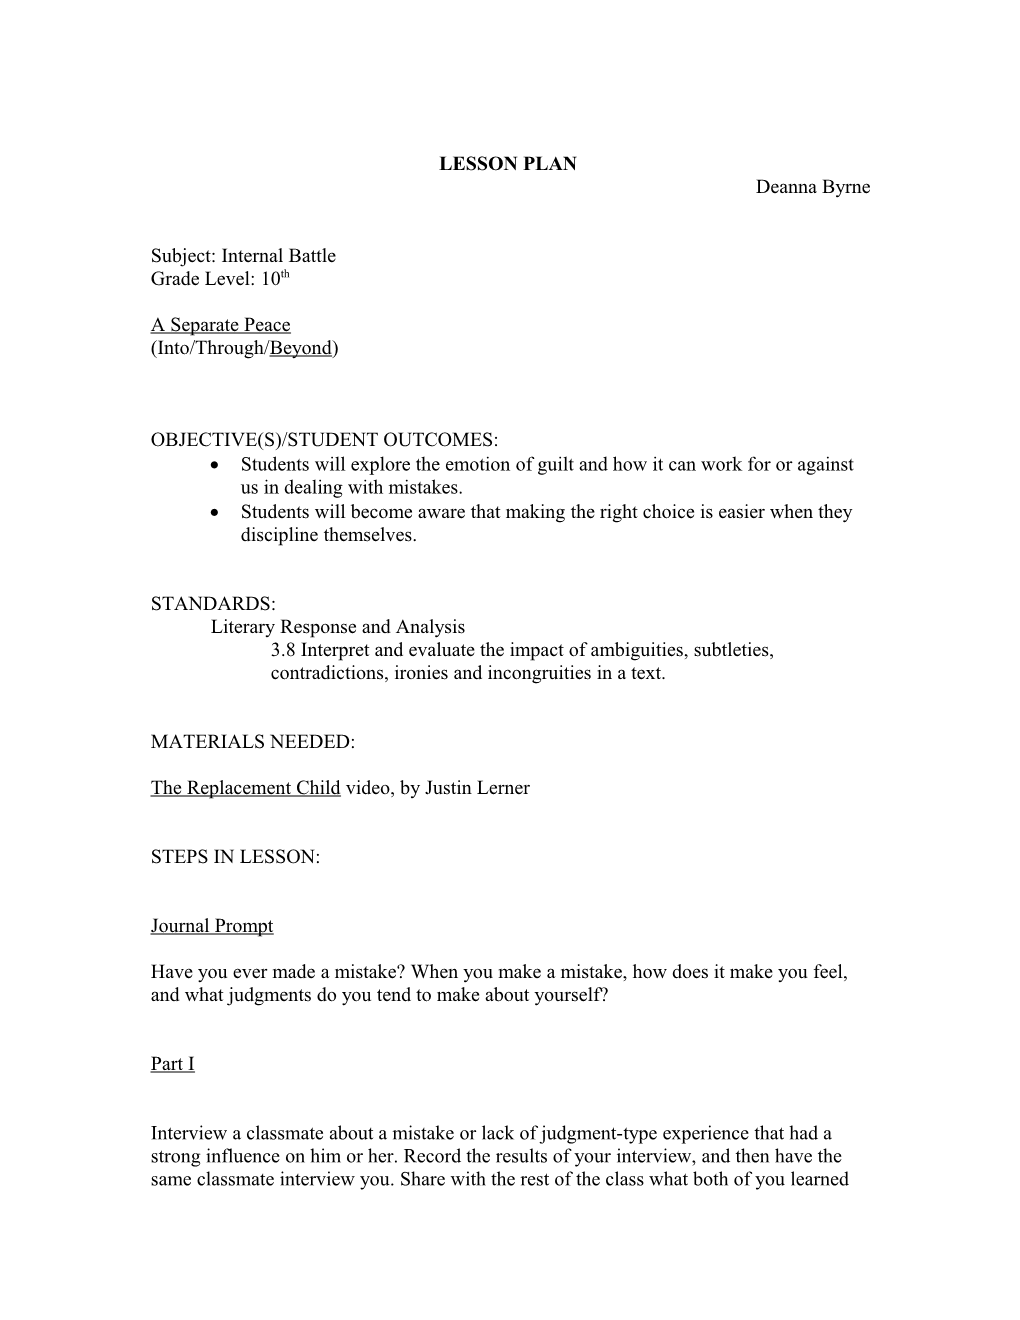 Lesson Plan Template s32